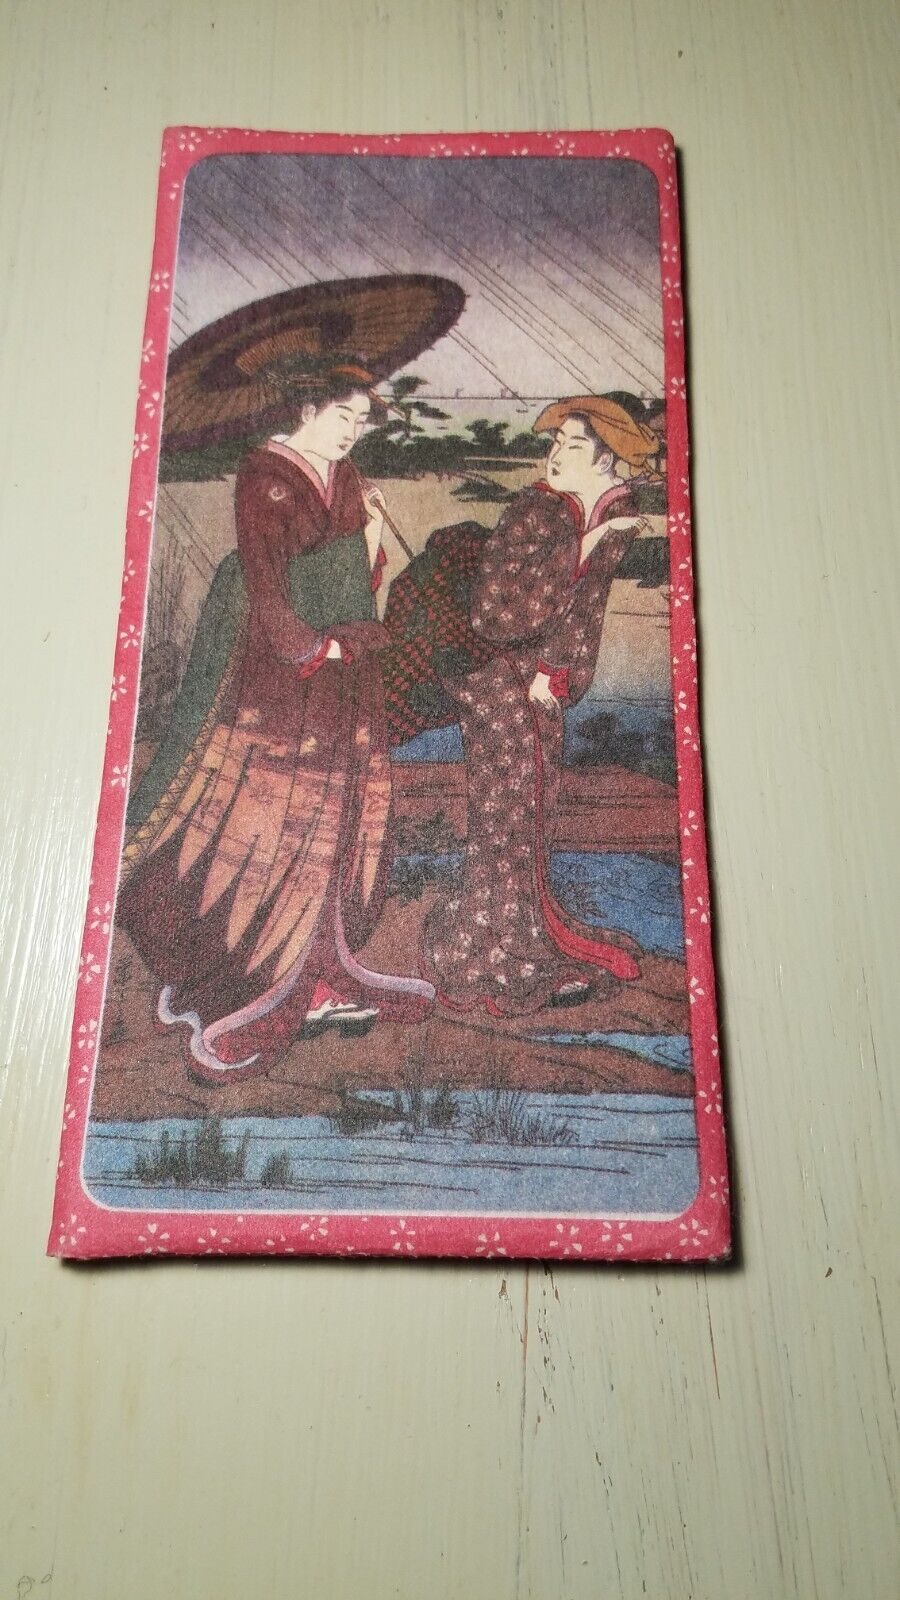 VINTAGE JAPANESE RICE PAPER “WAGAMI” WALLET CHECKBOOK COVER AND NOTEPAD GEISHA